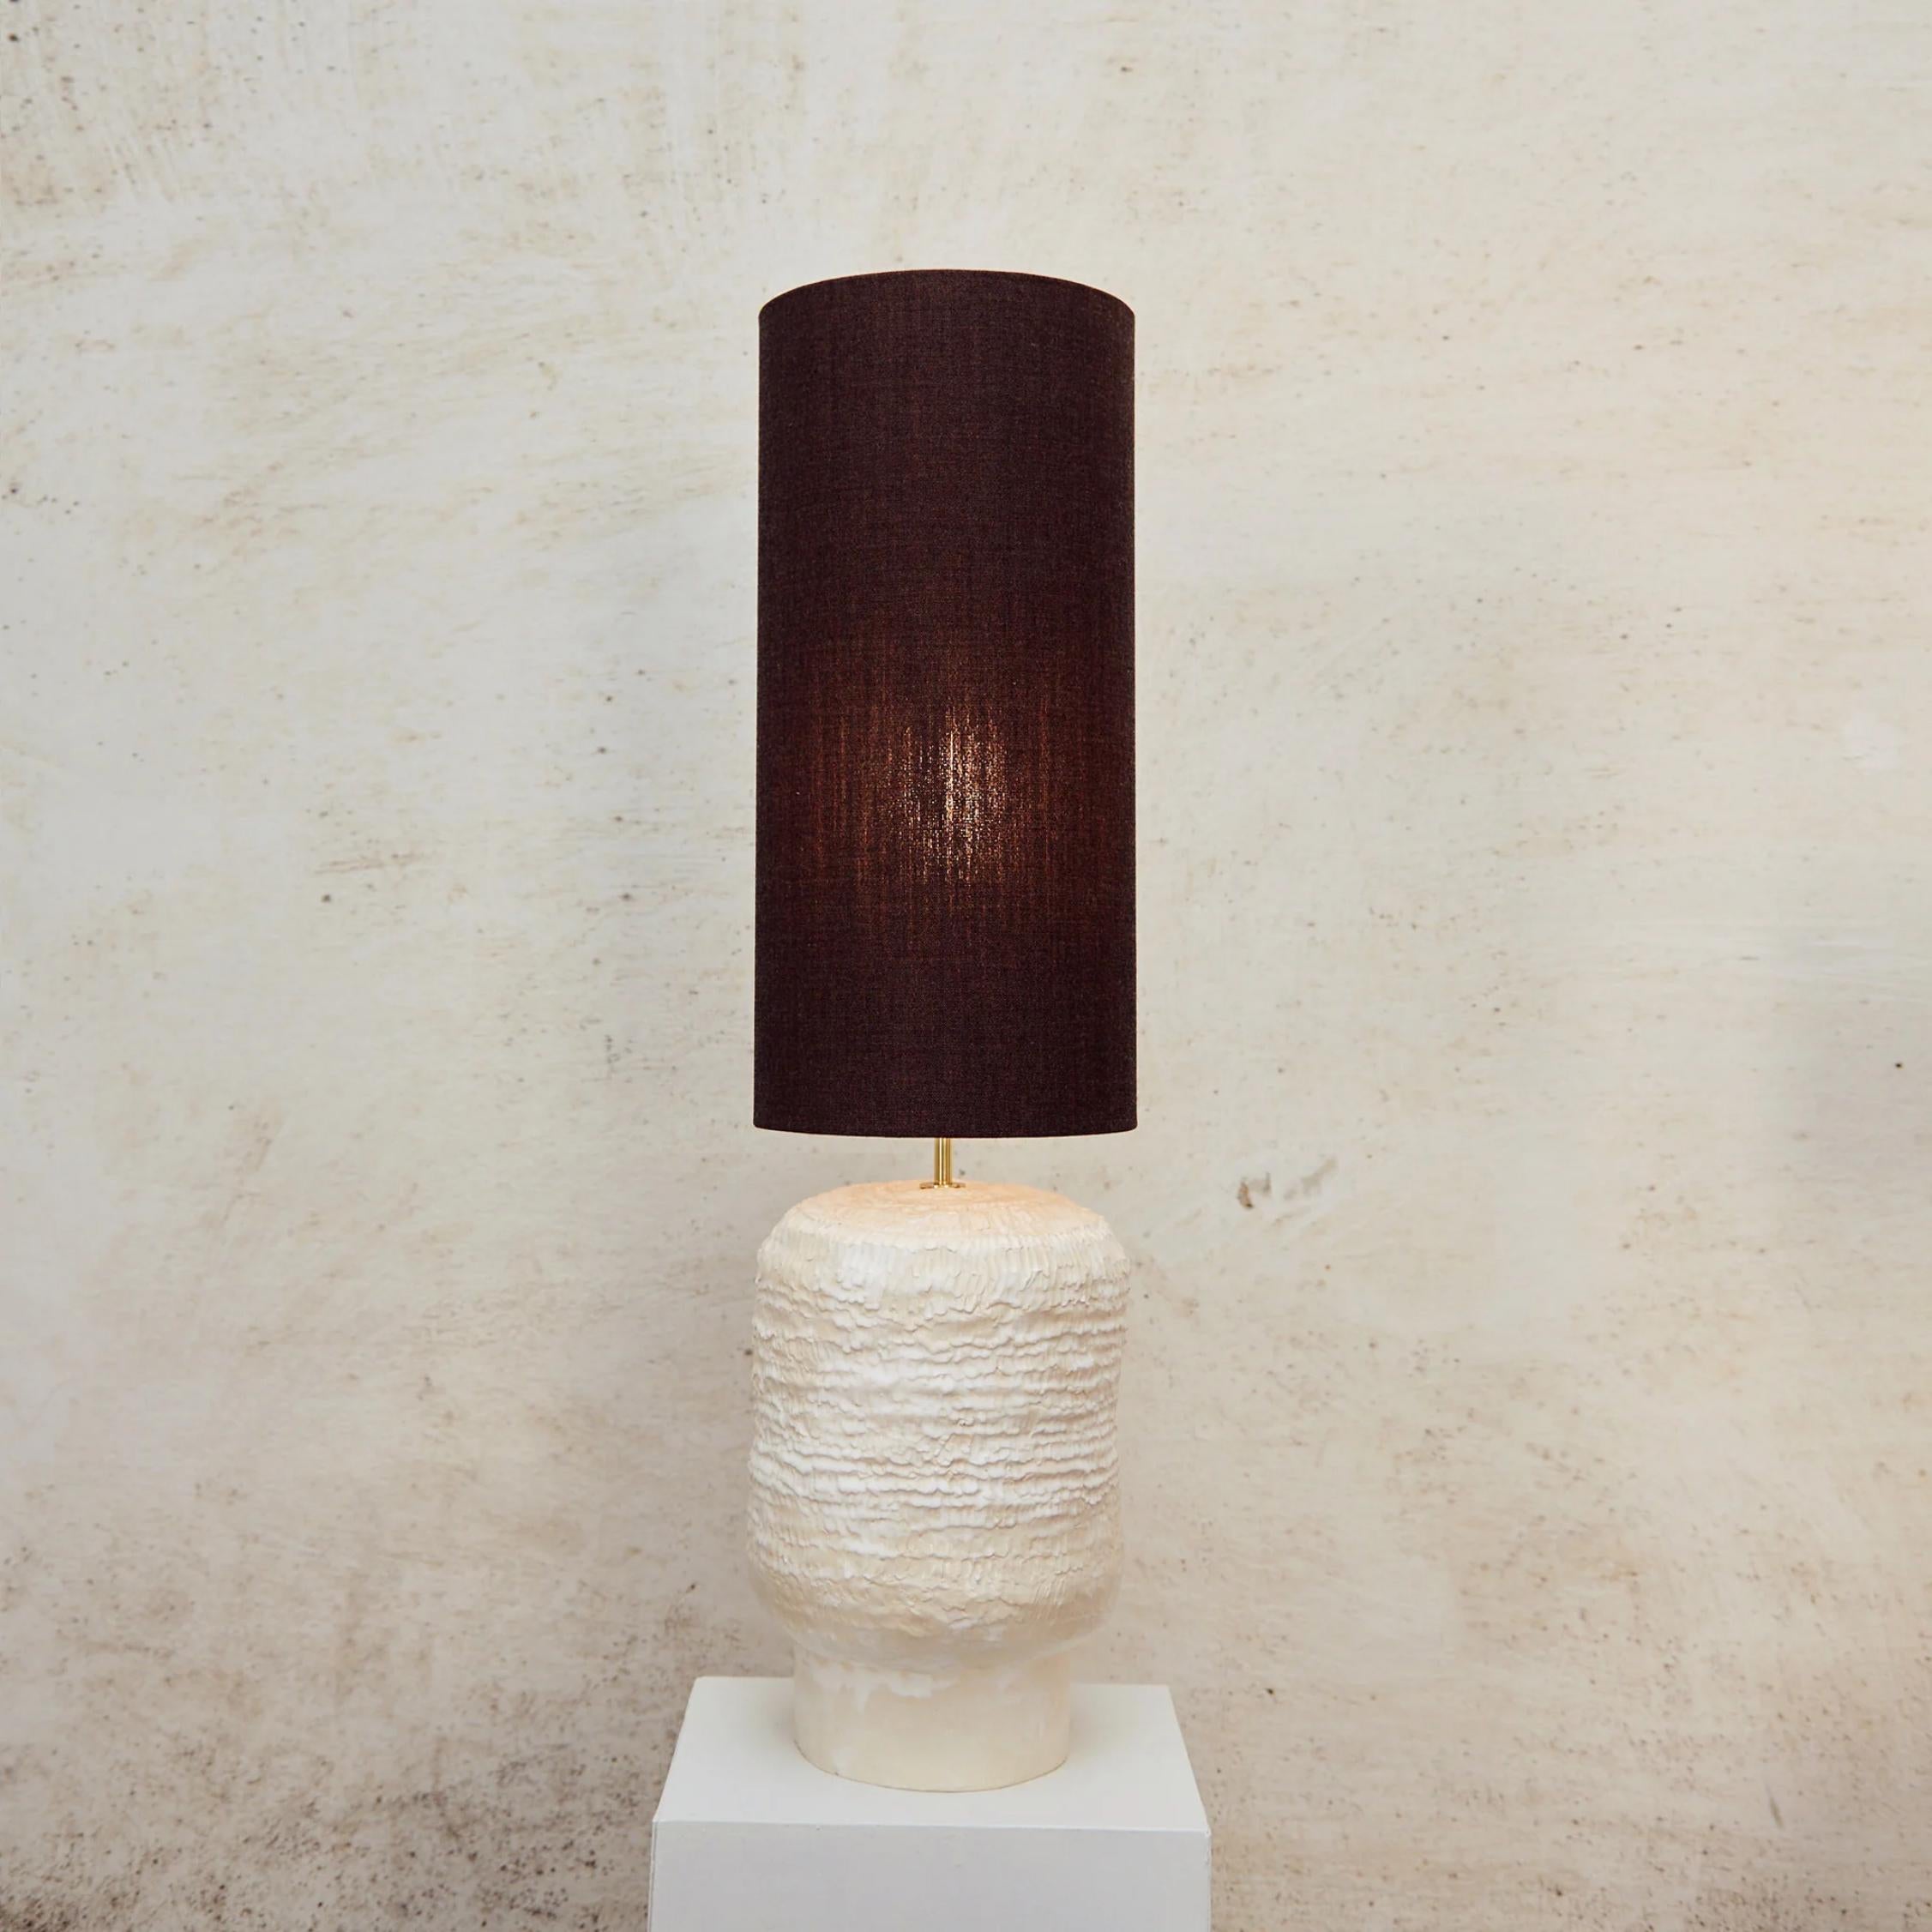 Textured Ceramic Lamp by Project 213A
Dimensions: W 23 x D 23 x H 89 cm
Materials: Ceramic, Wool, Nylon

The artisanal ceramic lights have been created inhouse and are a result of exploring traditional shapes with a playful twist on proportions